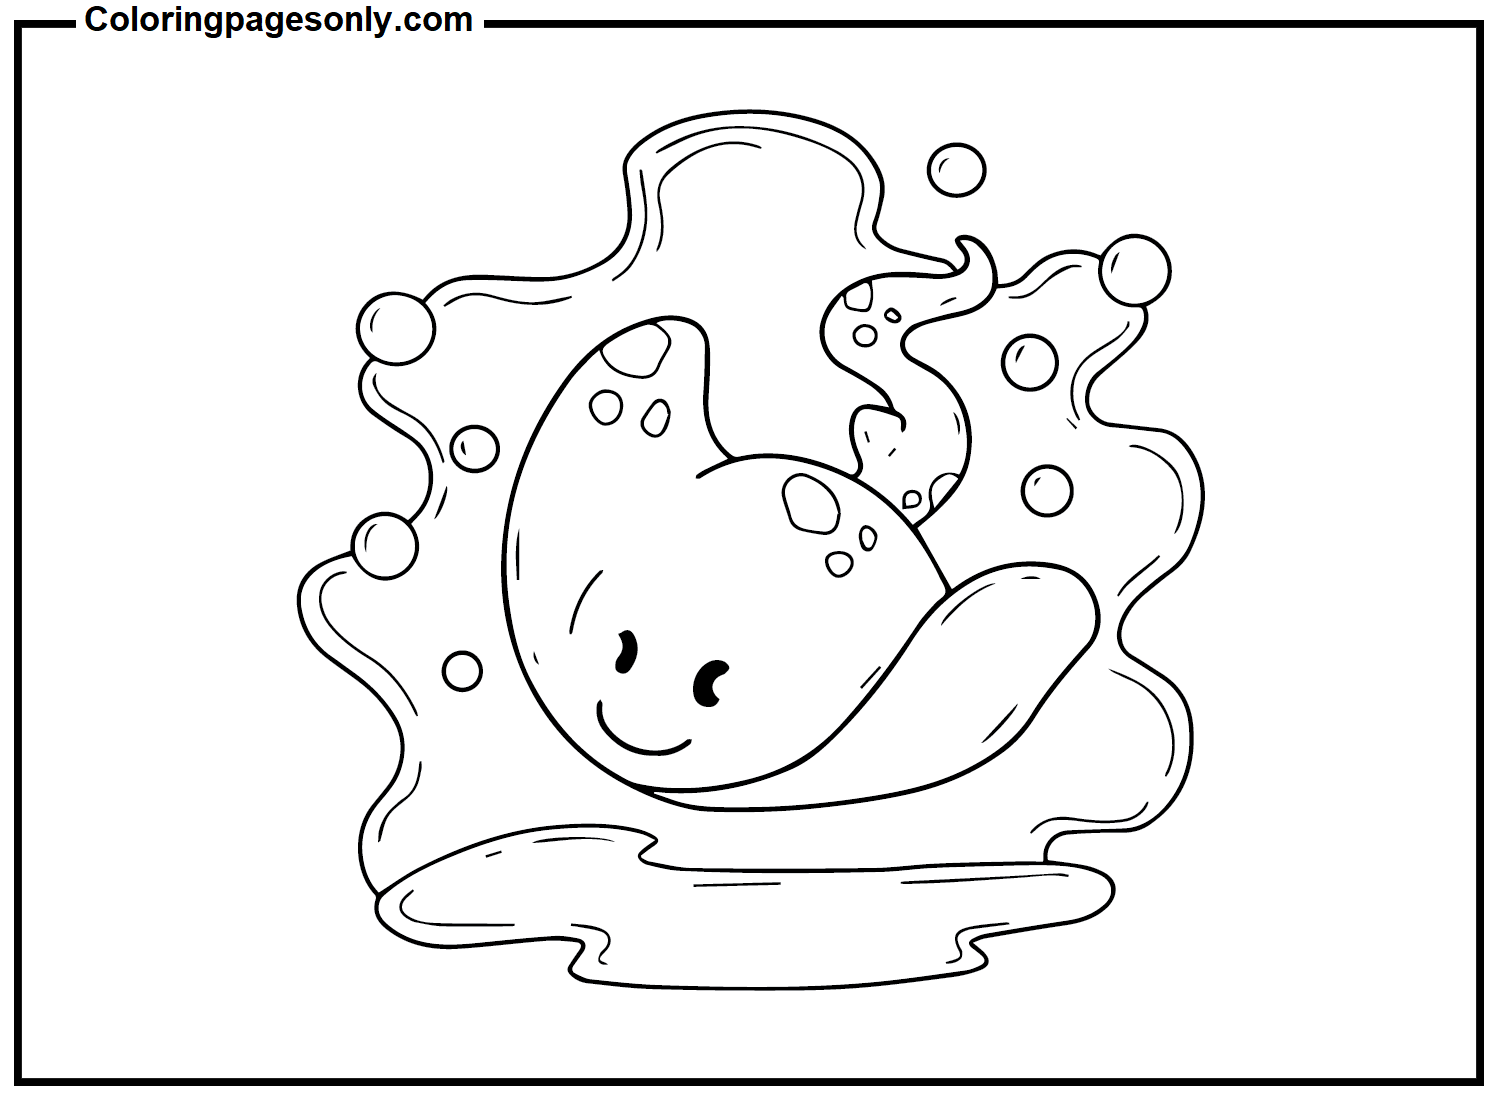 Adorable Stingray Coloring Pages